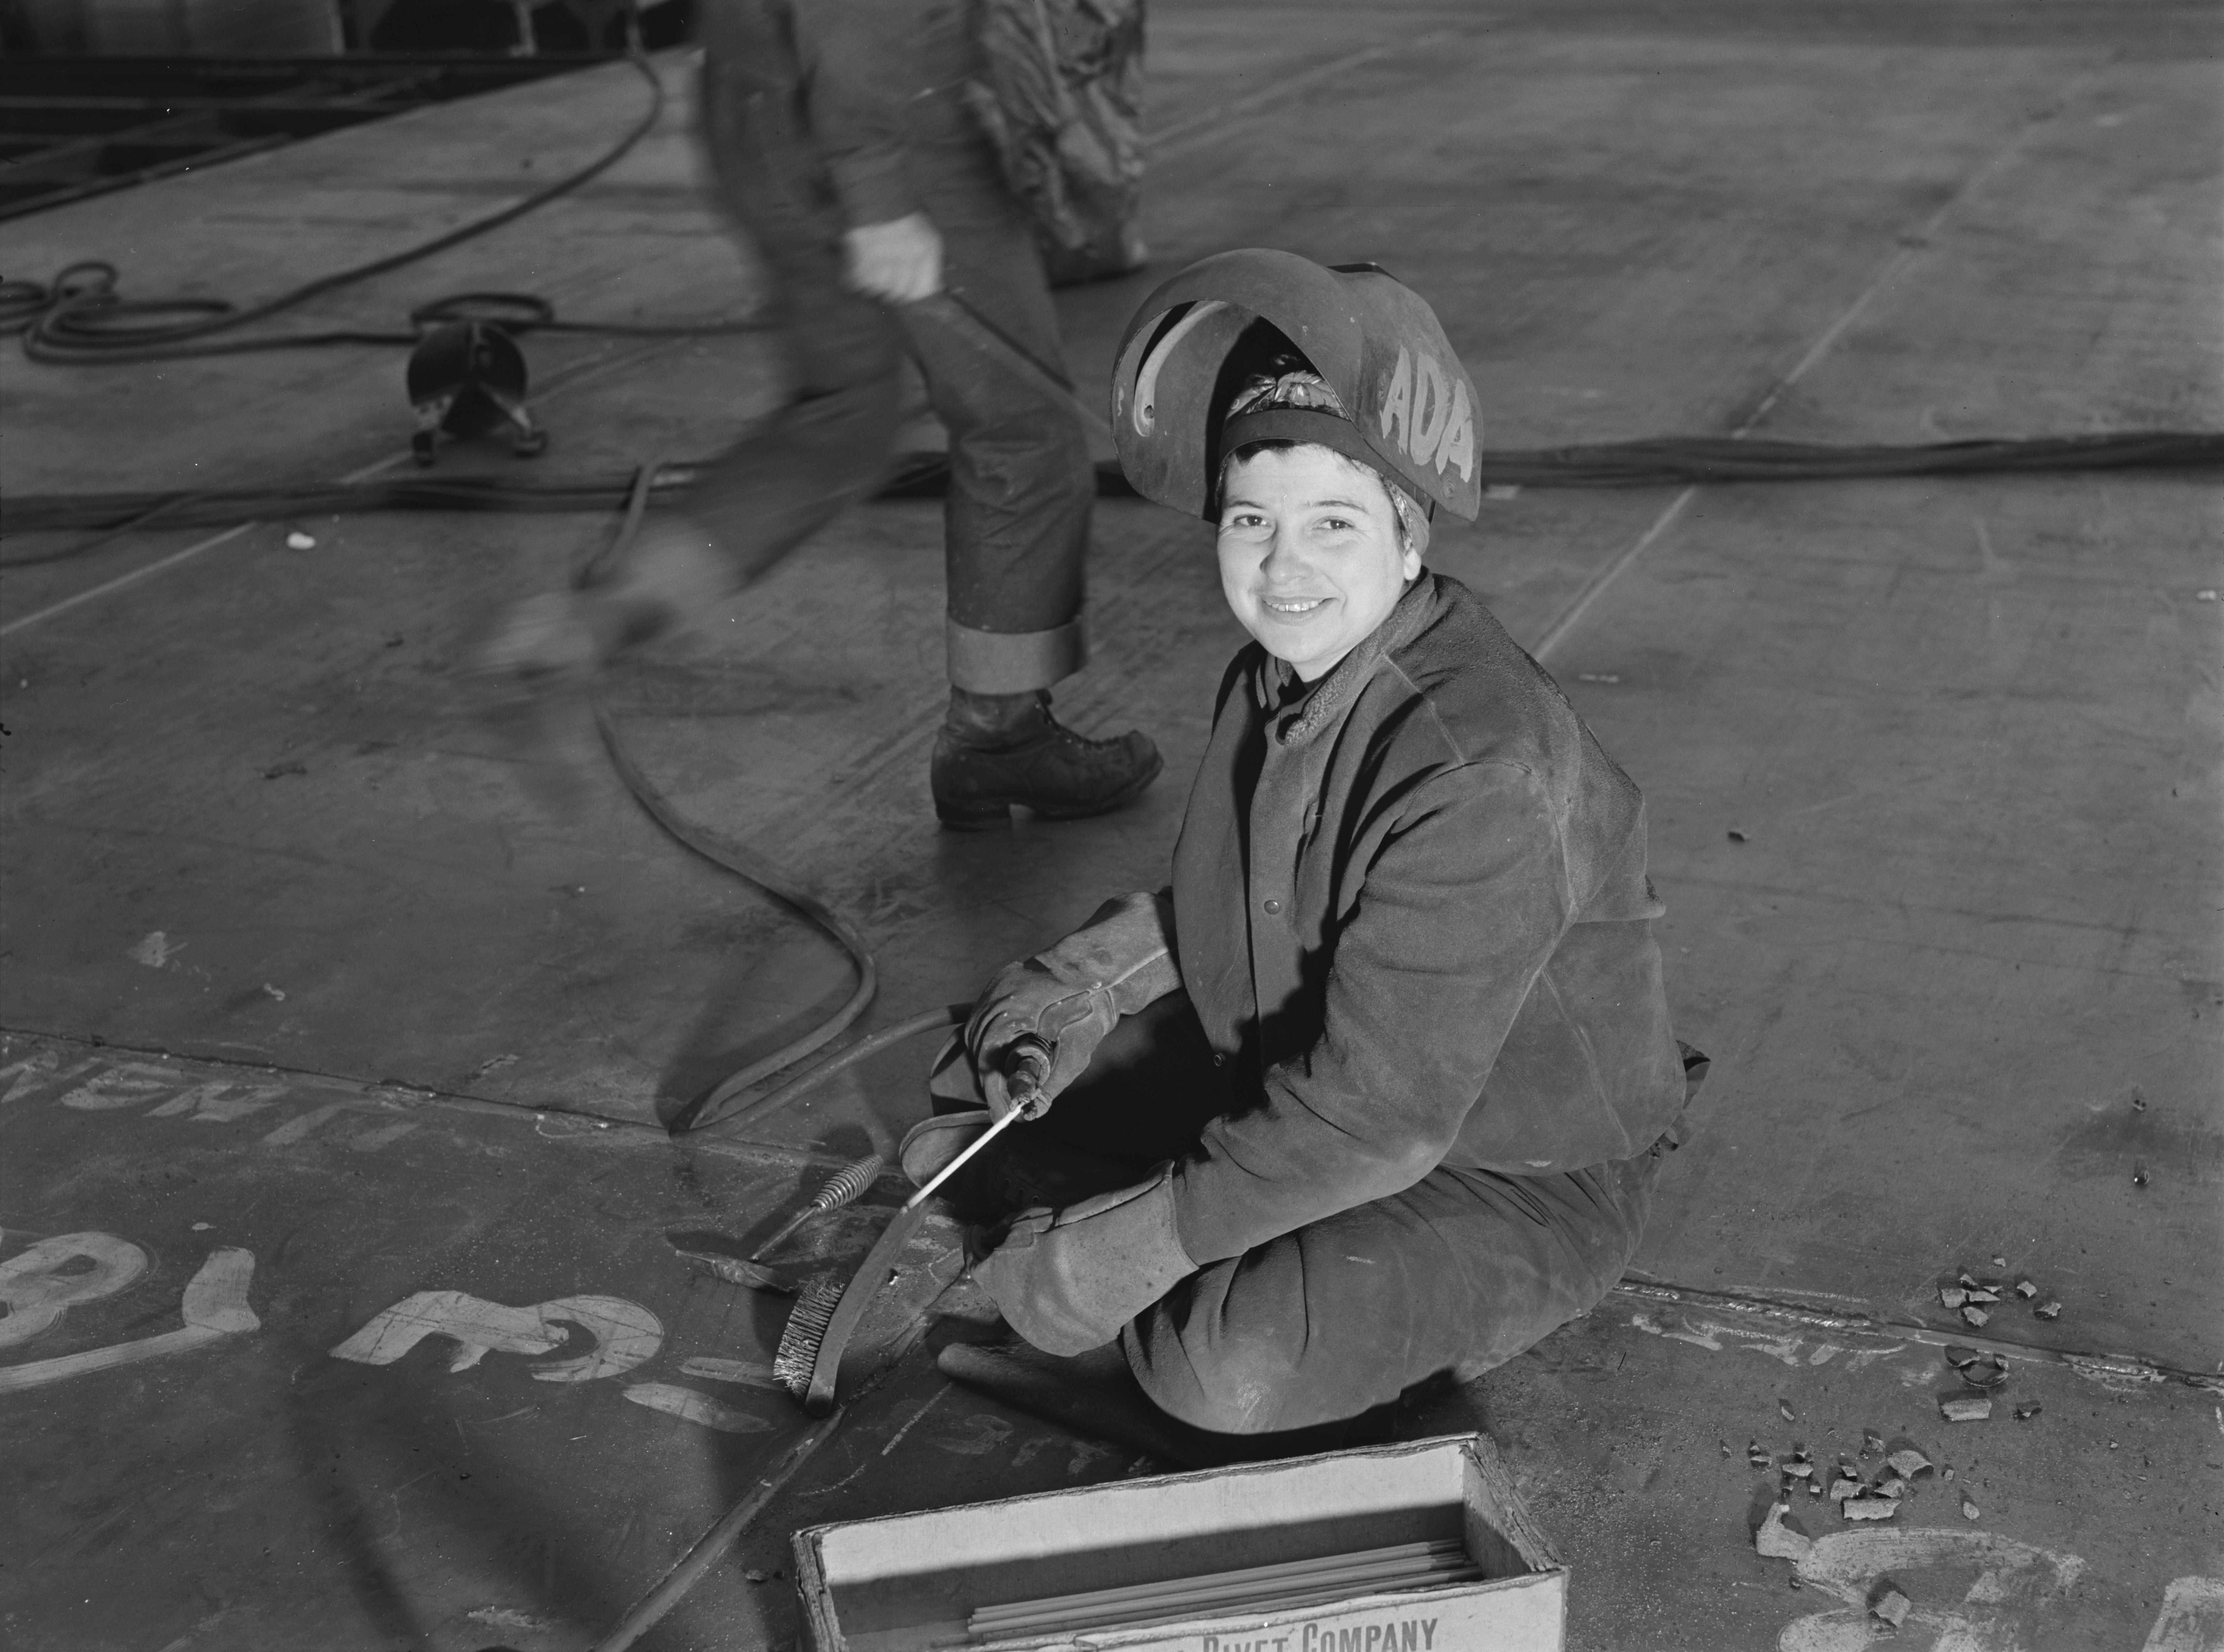 Tending the Homefront The Many Roles of Women in the San Francisco Bay Area During World War II (U.S image